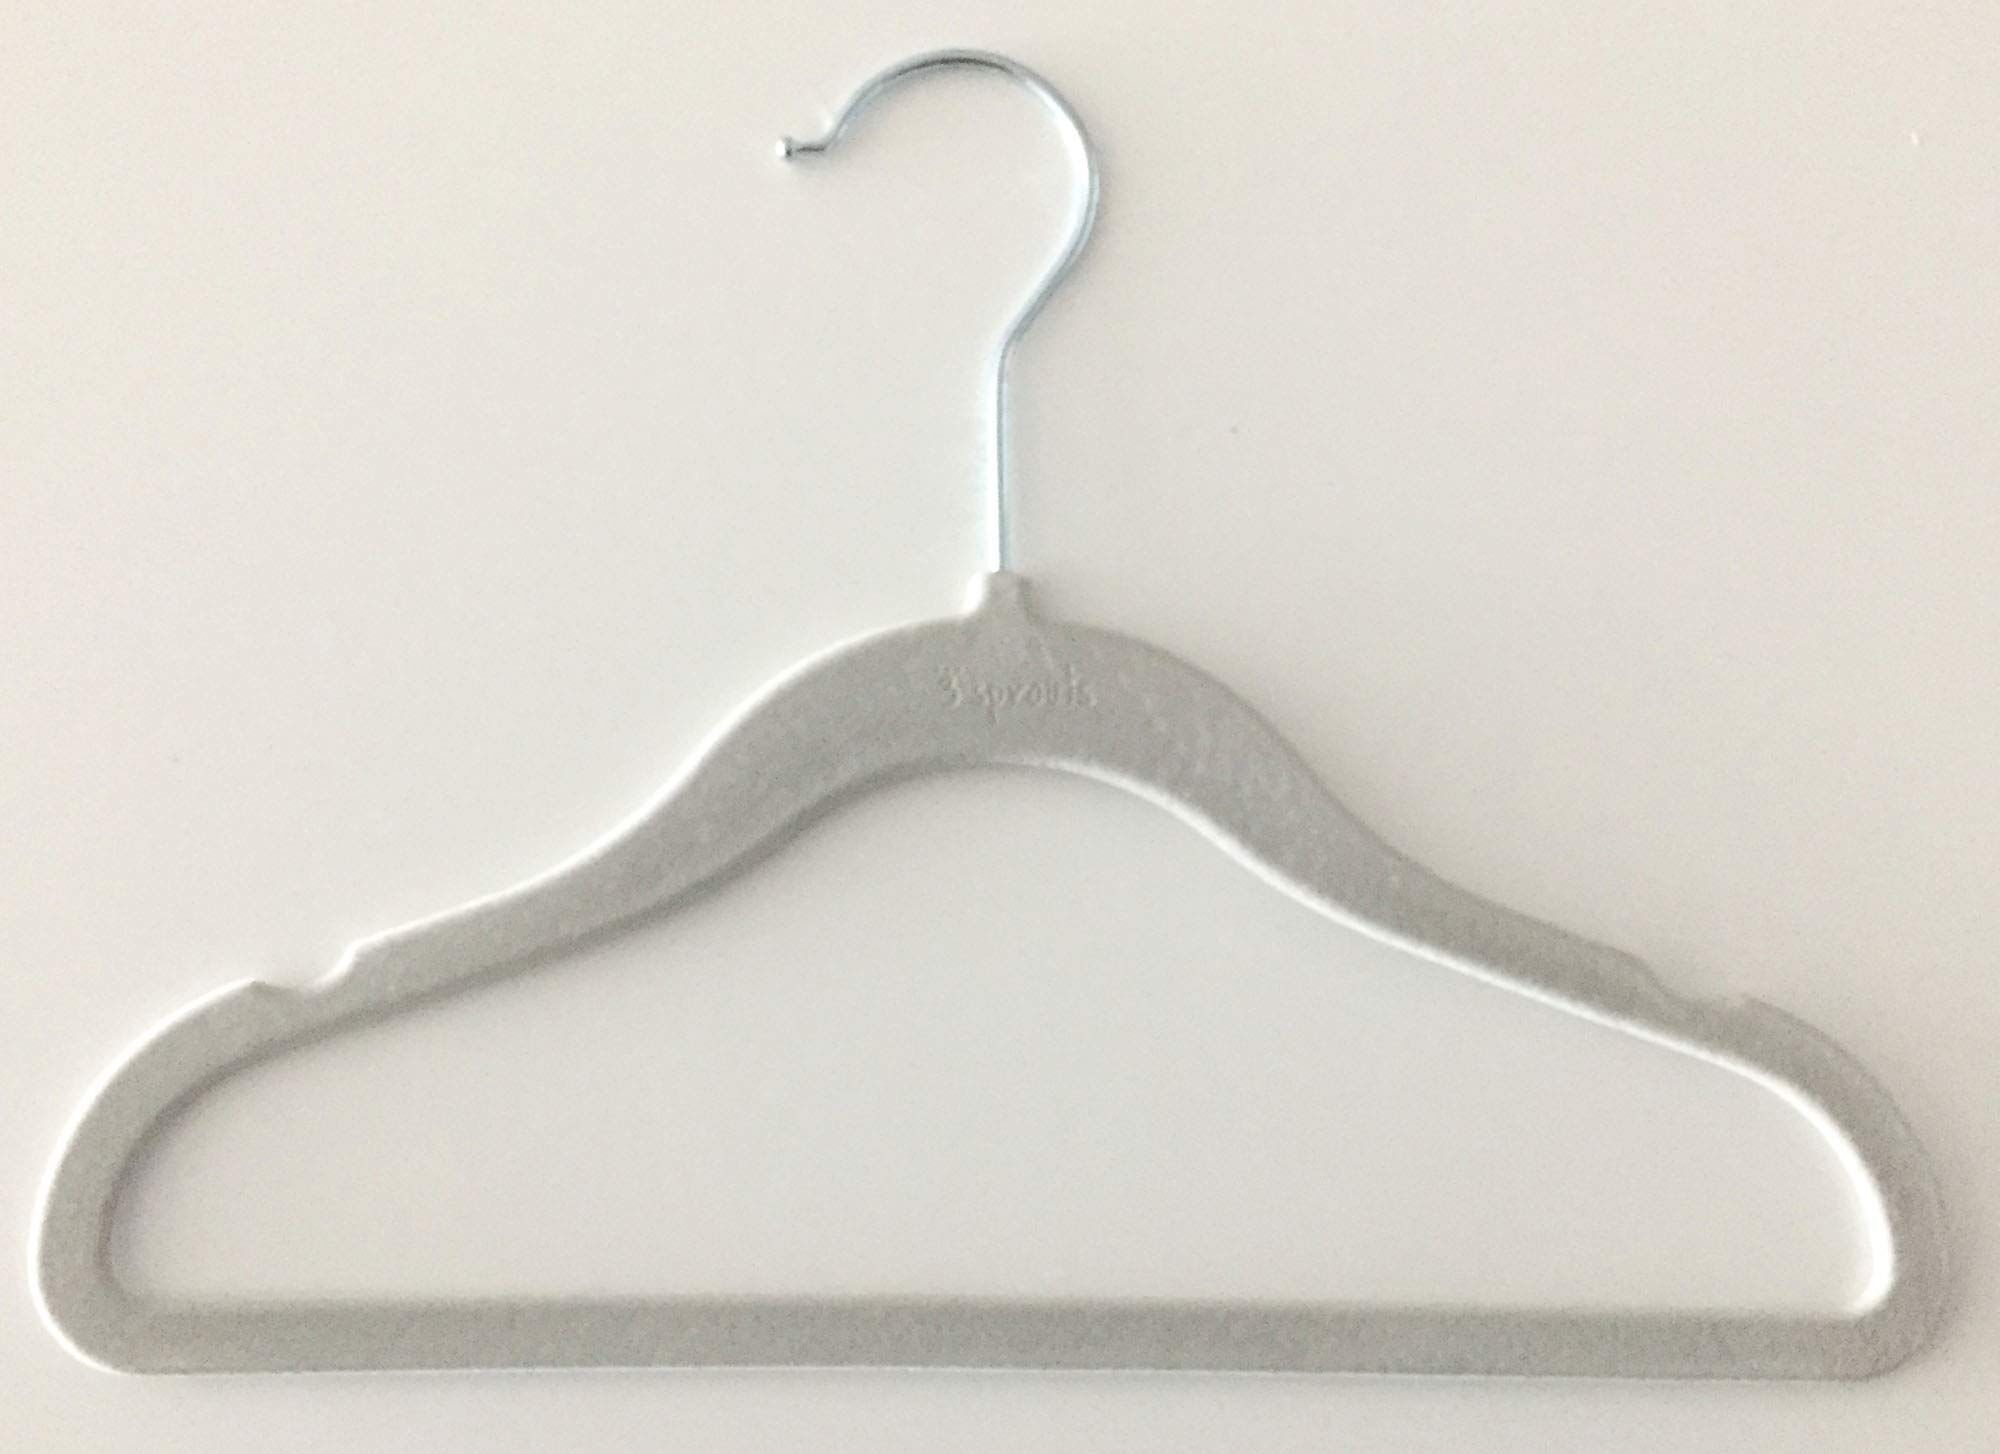 Set Of 10 Gray Velvet Hangers With Anti-slip Feature For Adult Clothing, To  Prevent Shoulder Bumps And Save Closet Space